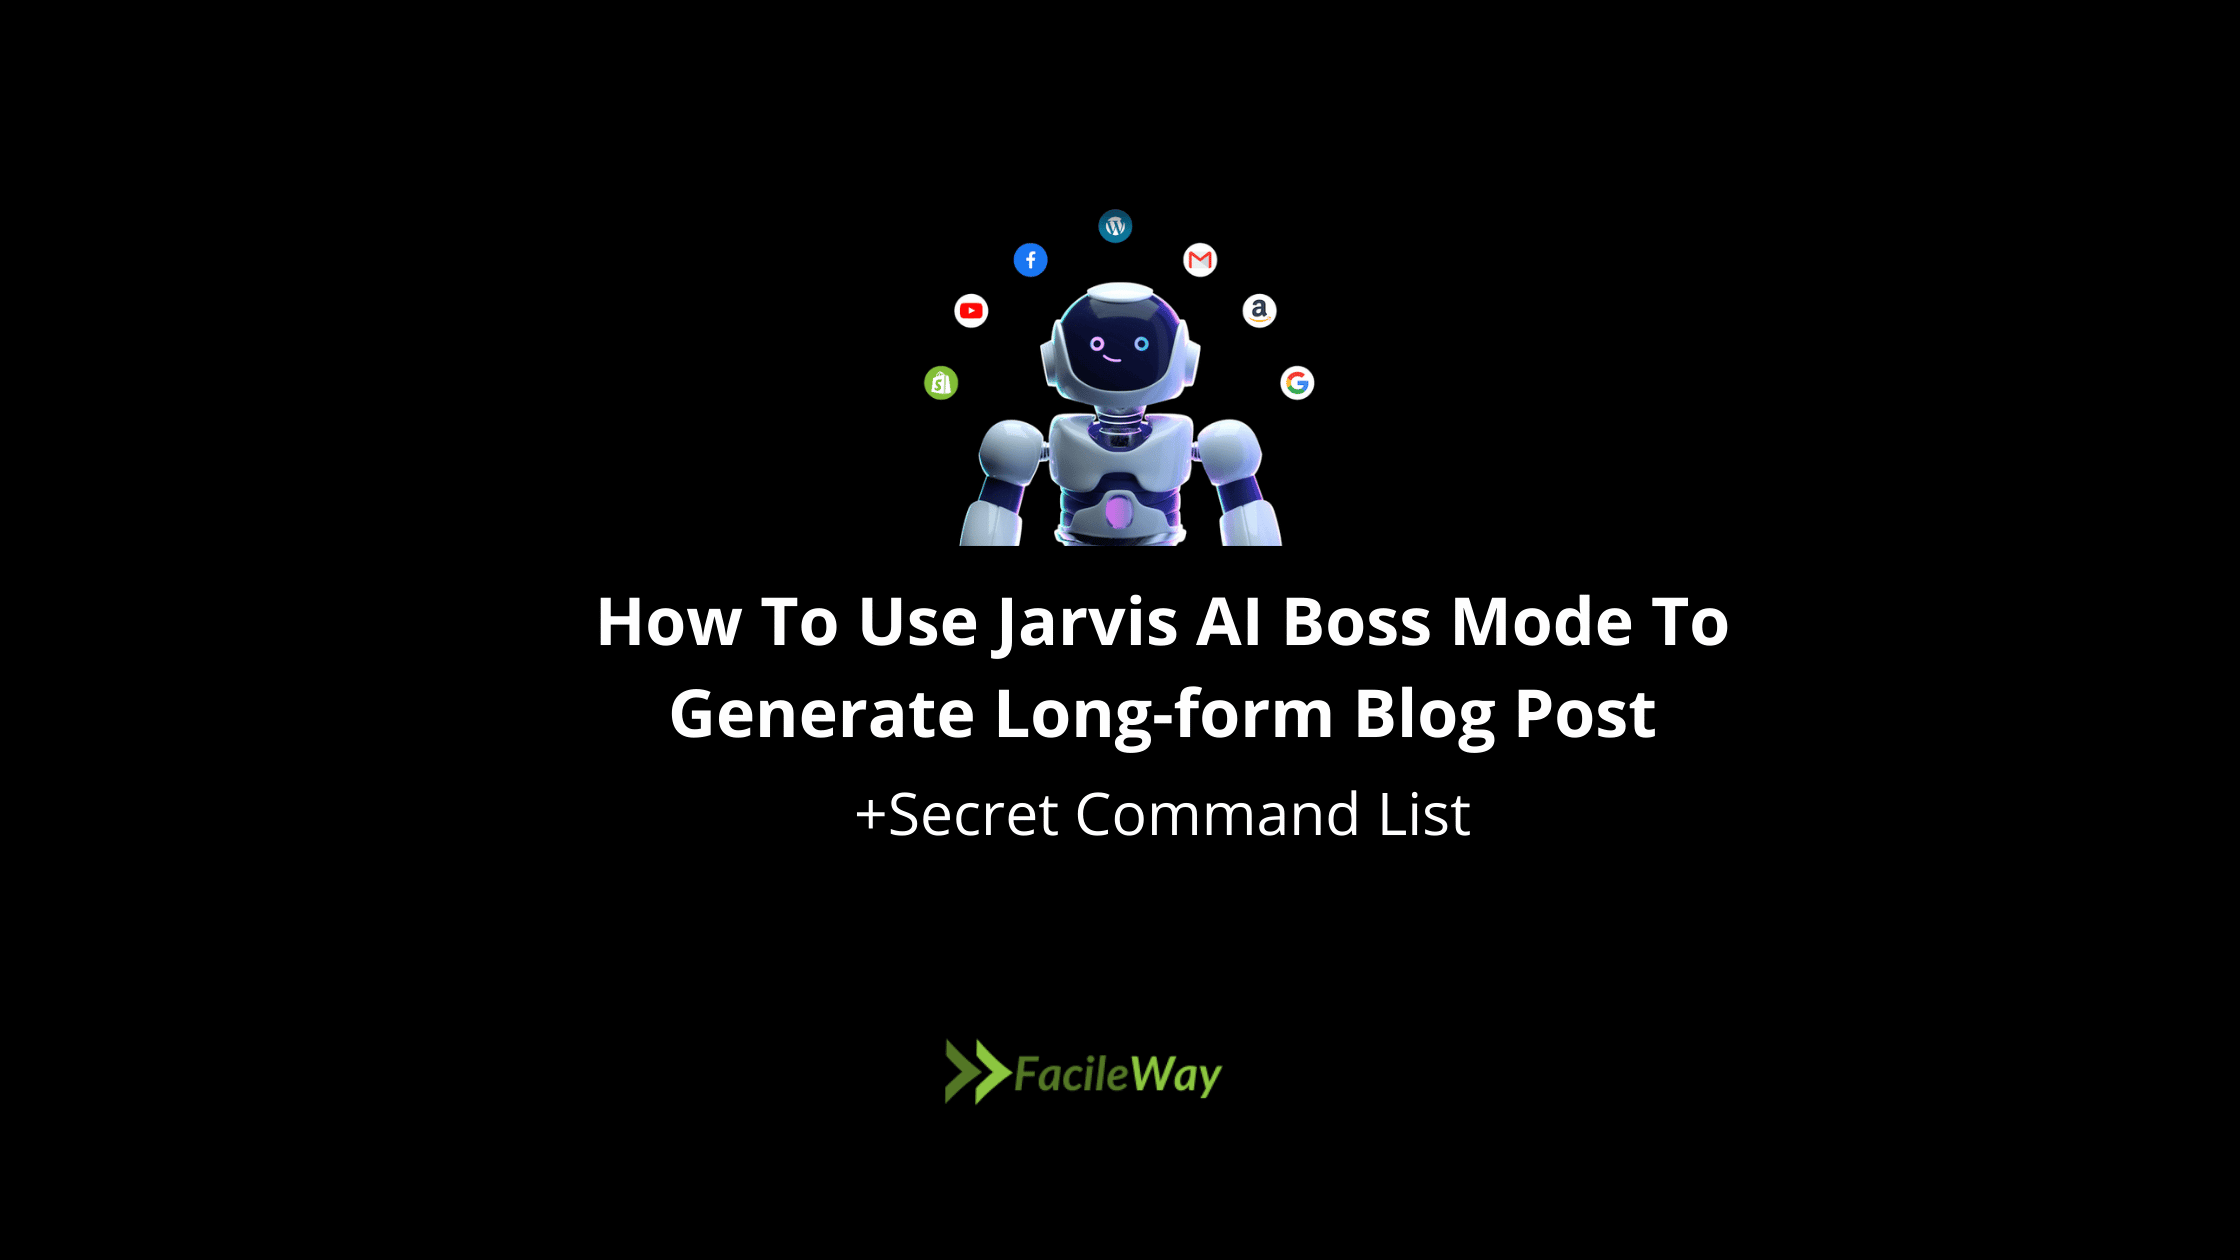 How To Use Jarvis AI Boss Mode